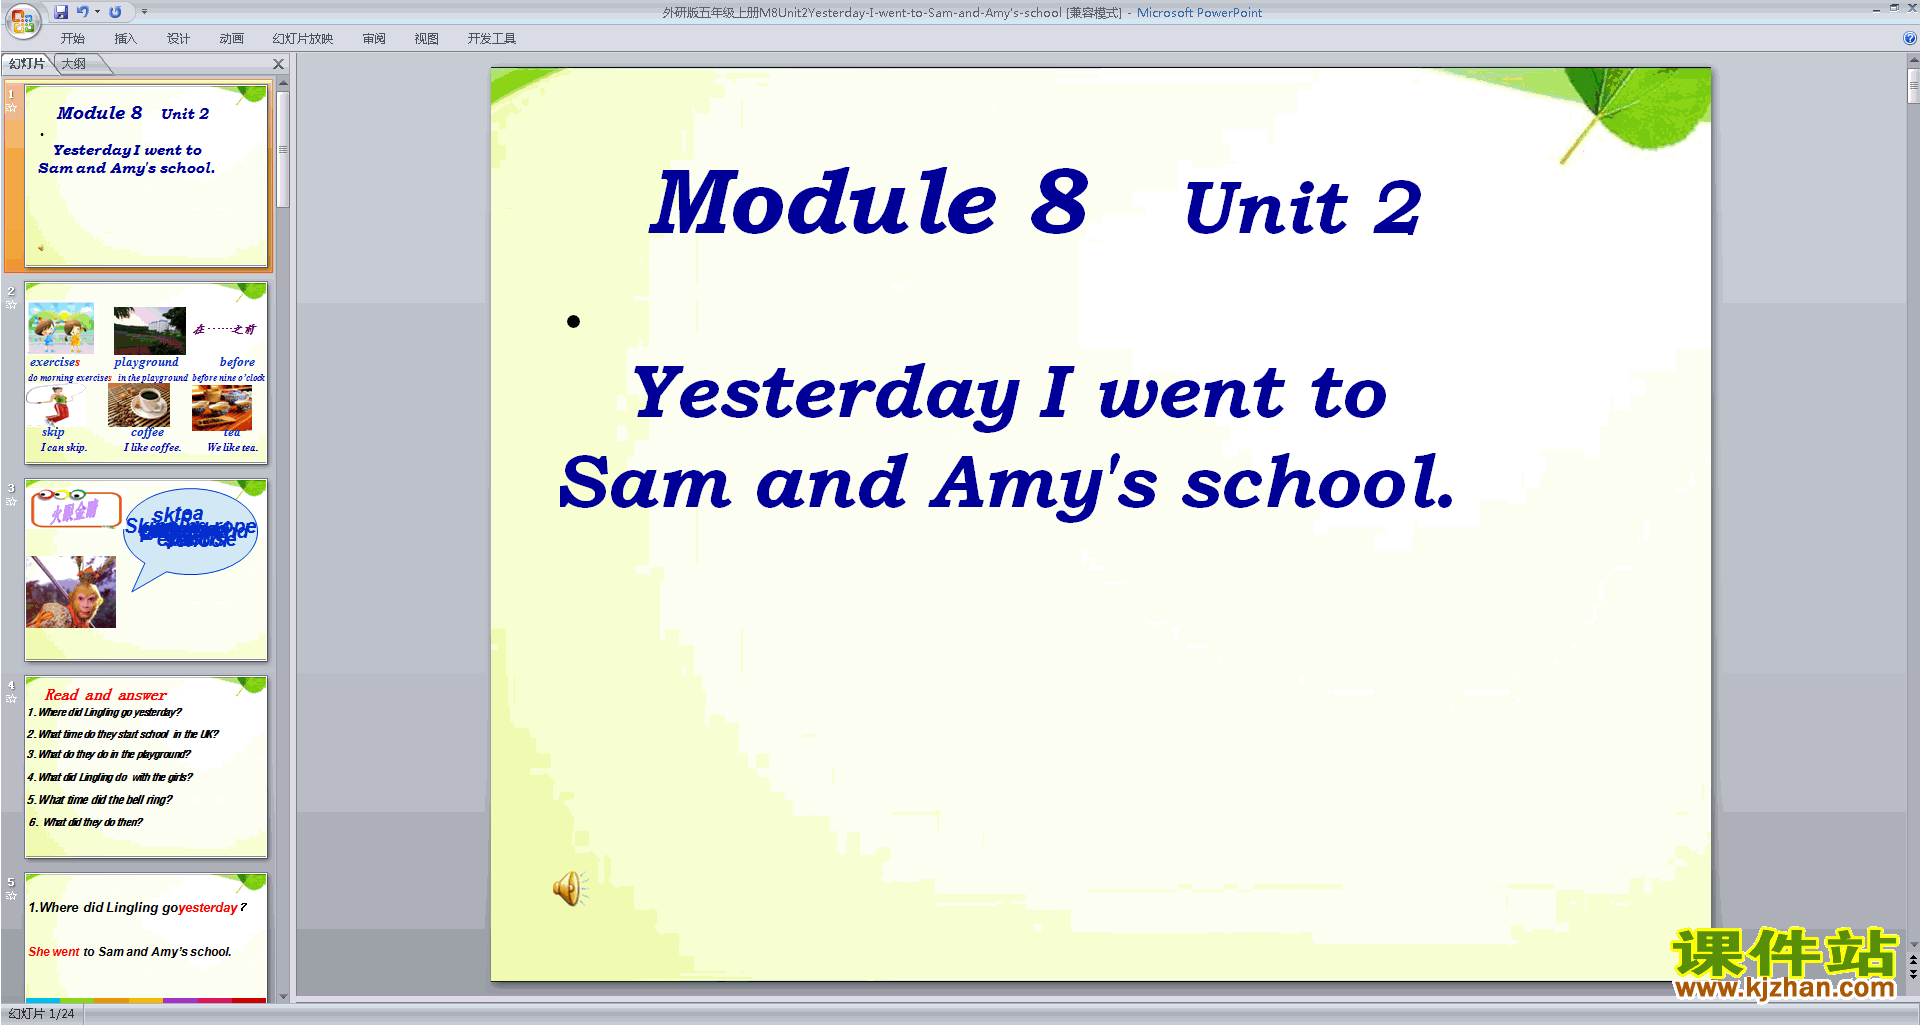 Module8 Unit2 Yesterday I went to Sam and Amy